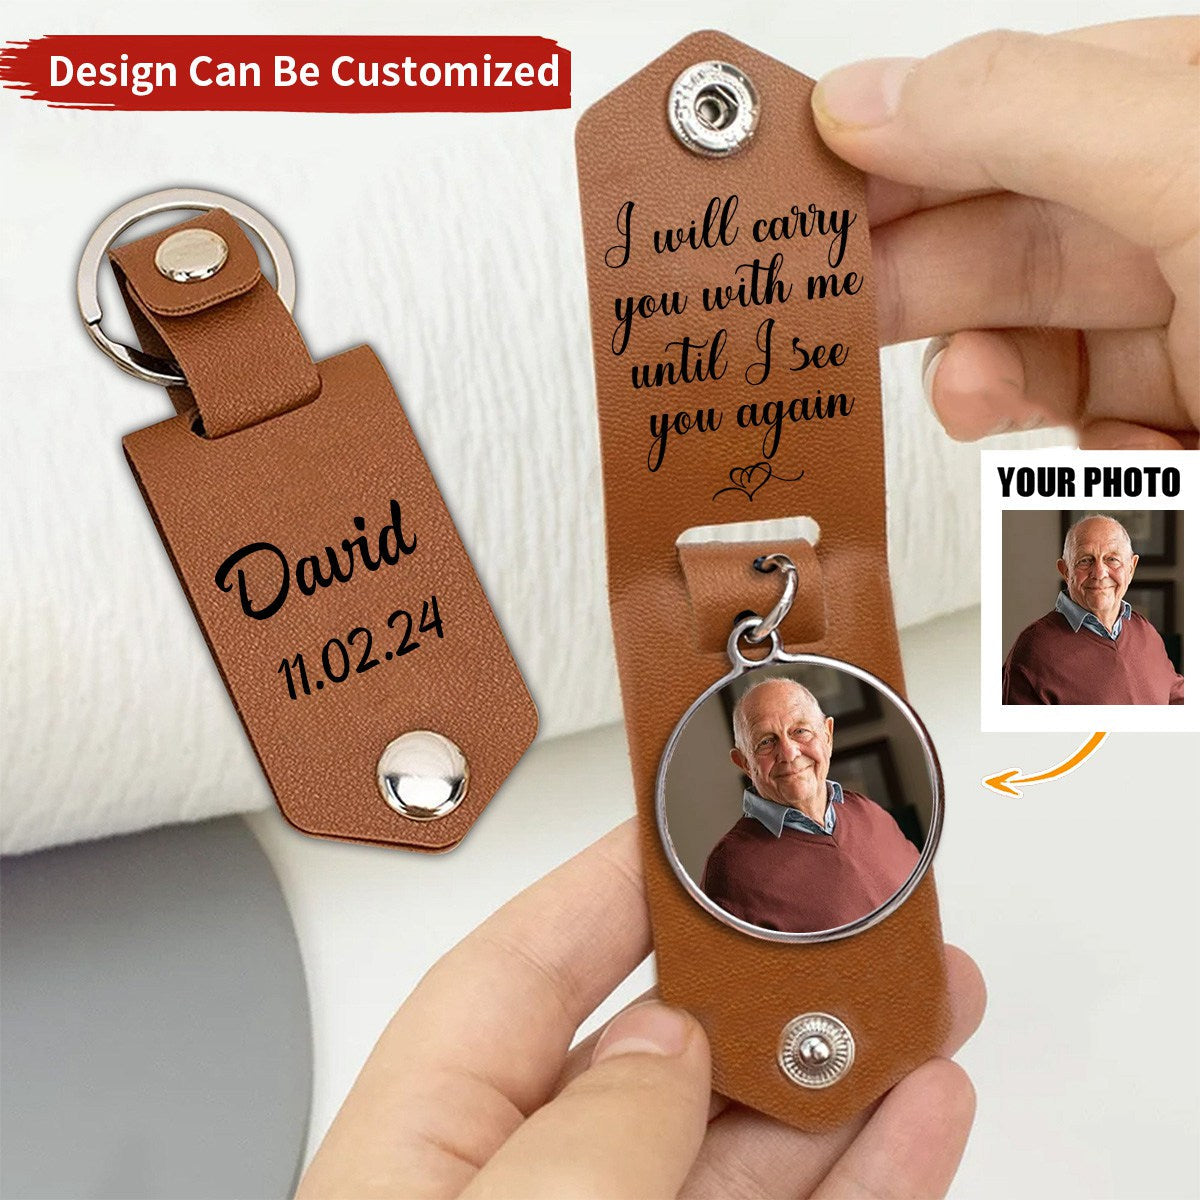 Personalized Leather Photo Keychain - Memorial Photo Gifts for Family Members